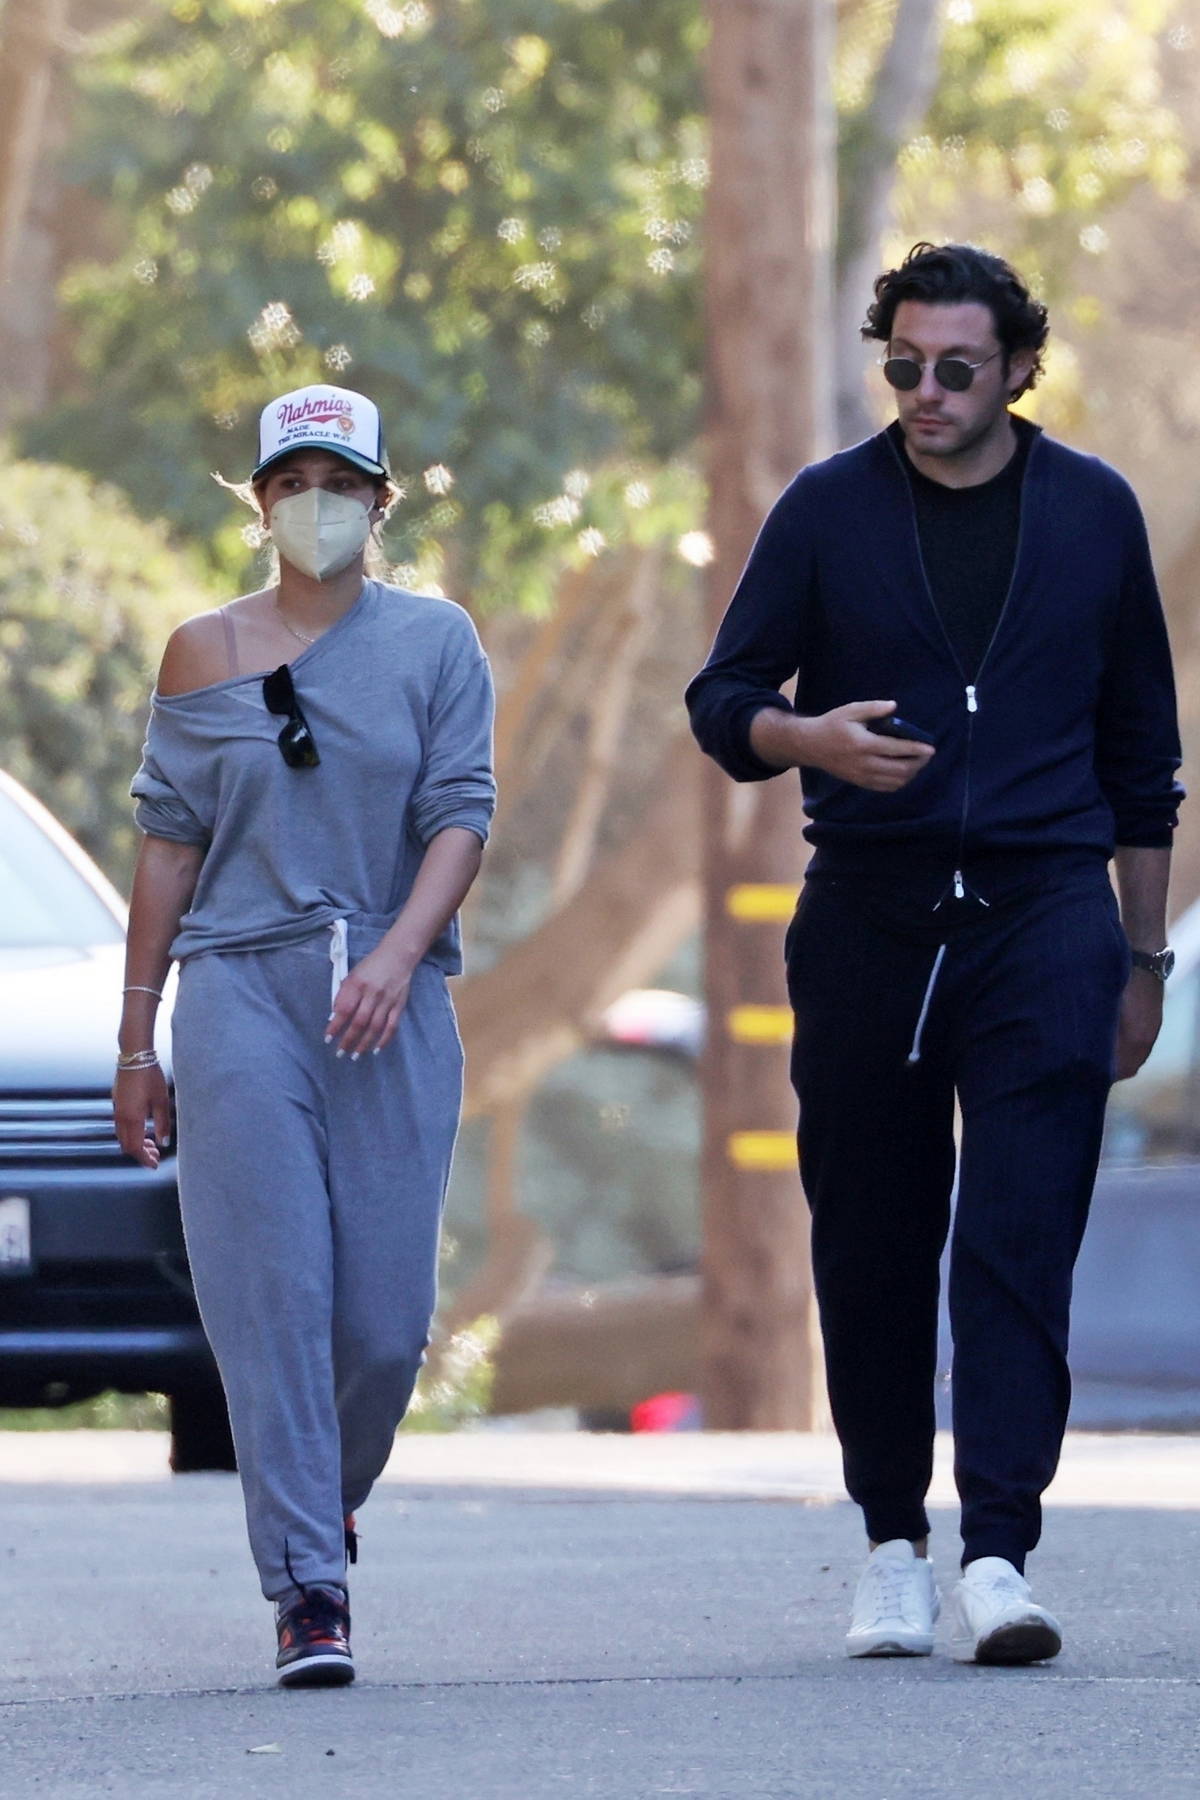 Sofia Richie dresses down in grey sweatsuit while out for an evening stroll  with a mystery